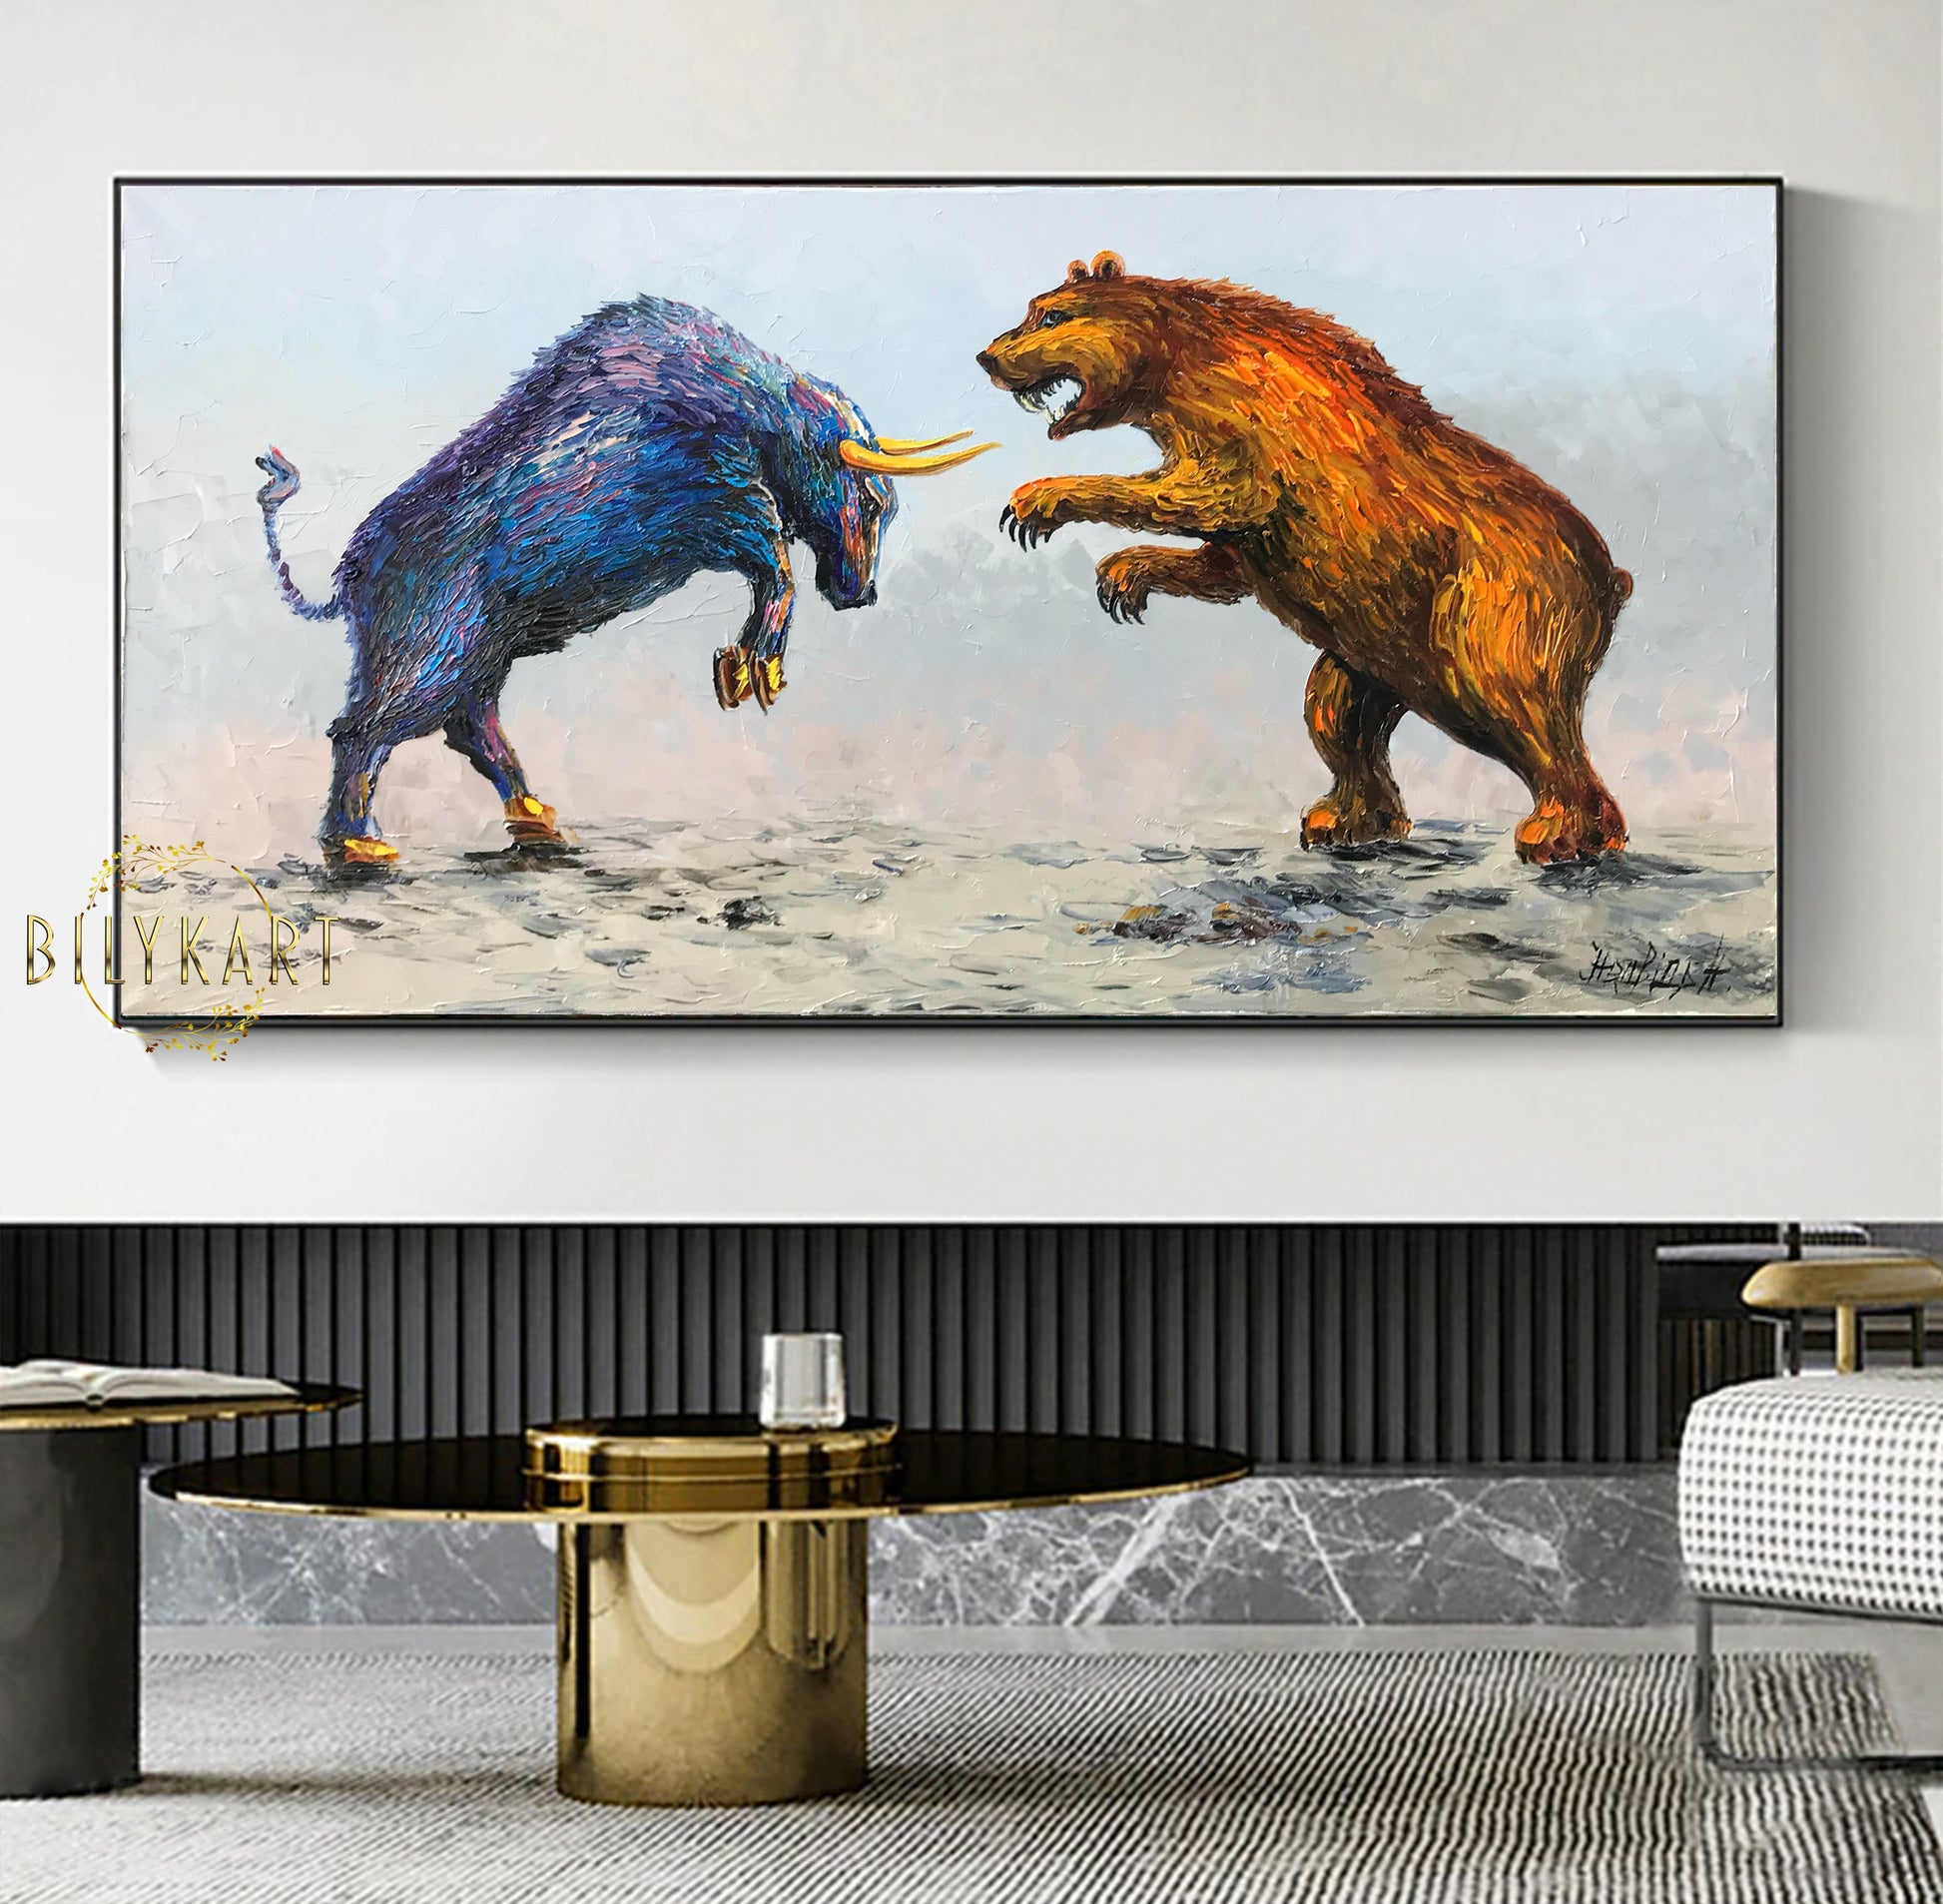 Large bull and bear market painting